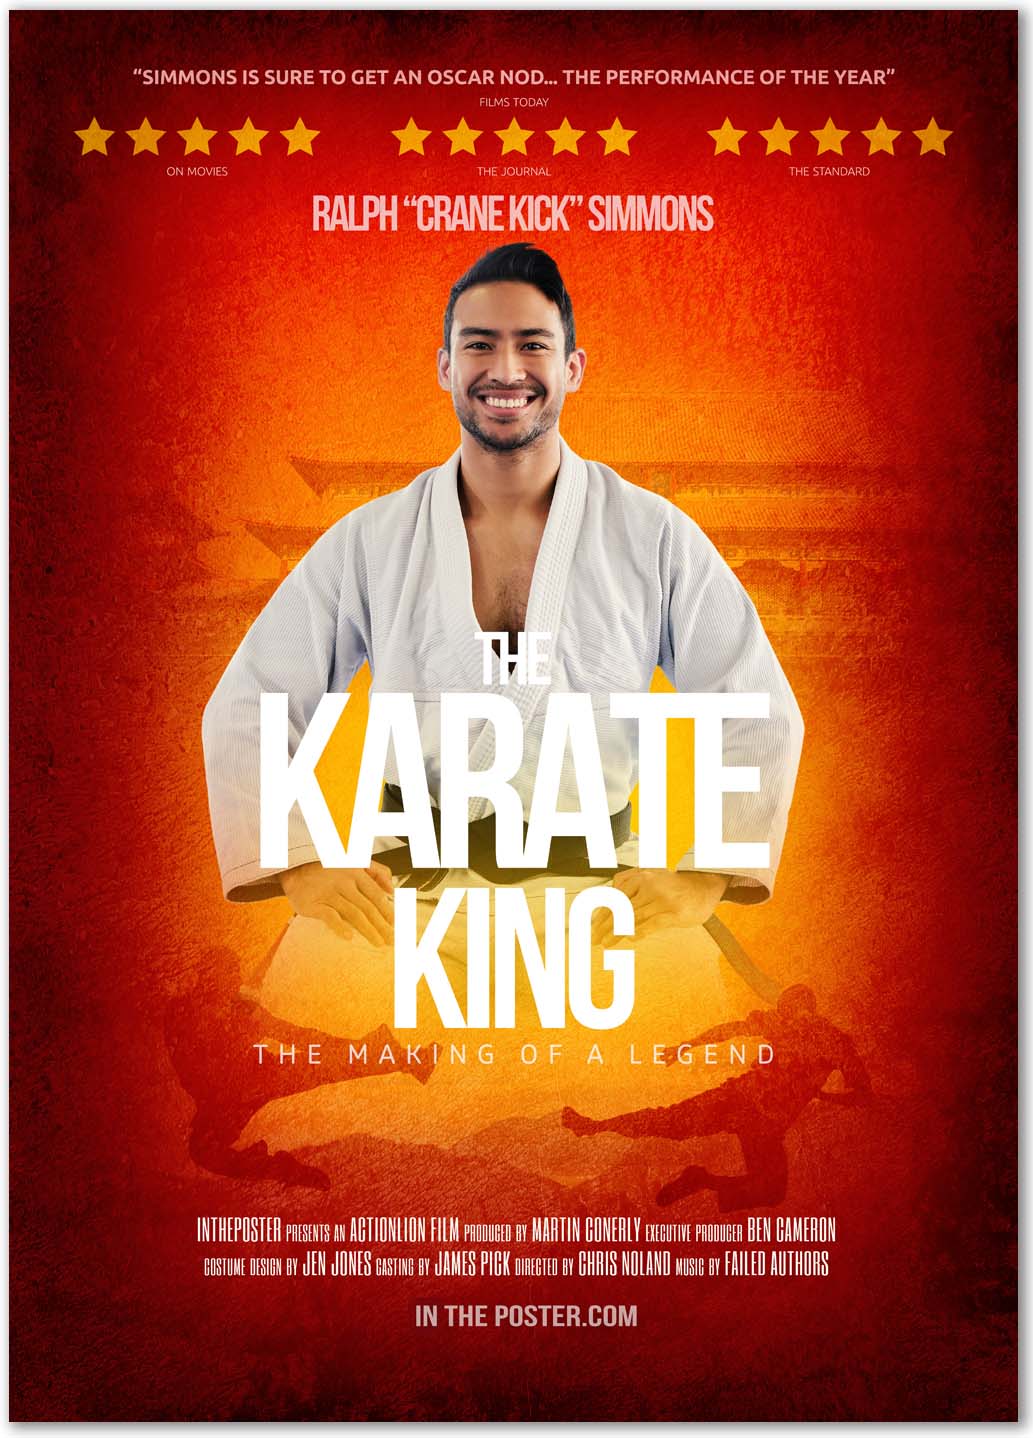  Movie poster titled 'The Karate King - The Making of a Legend' featuring a smiling man in a white karate gi, accolades at the top, actor's name Ralph 'Crane Kick' Simmons, and a gradient orange background with a silhouette of a karate kick; production credits and website listed at the bottom.